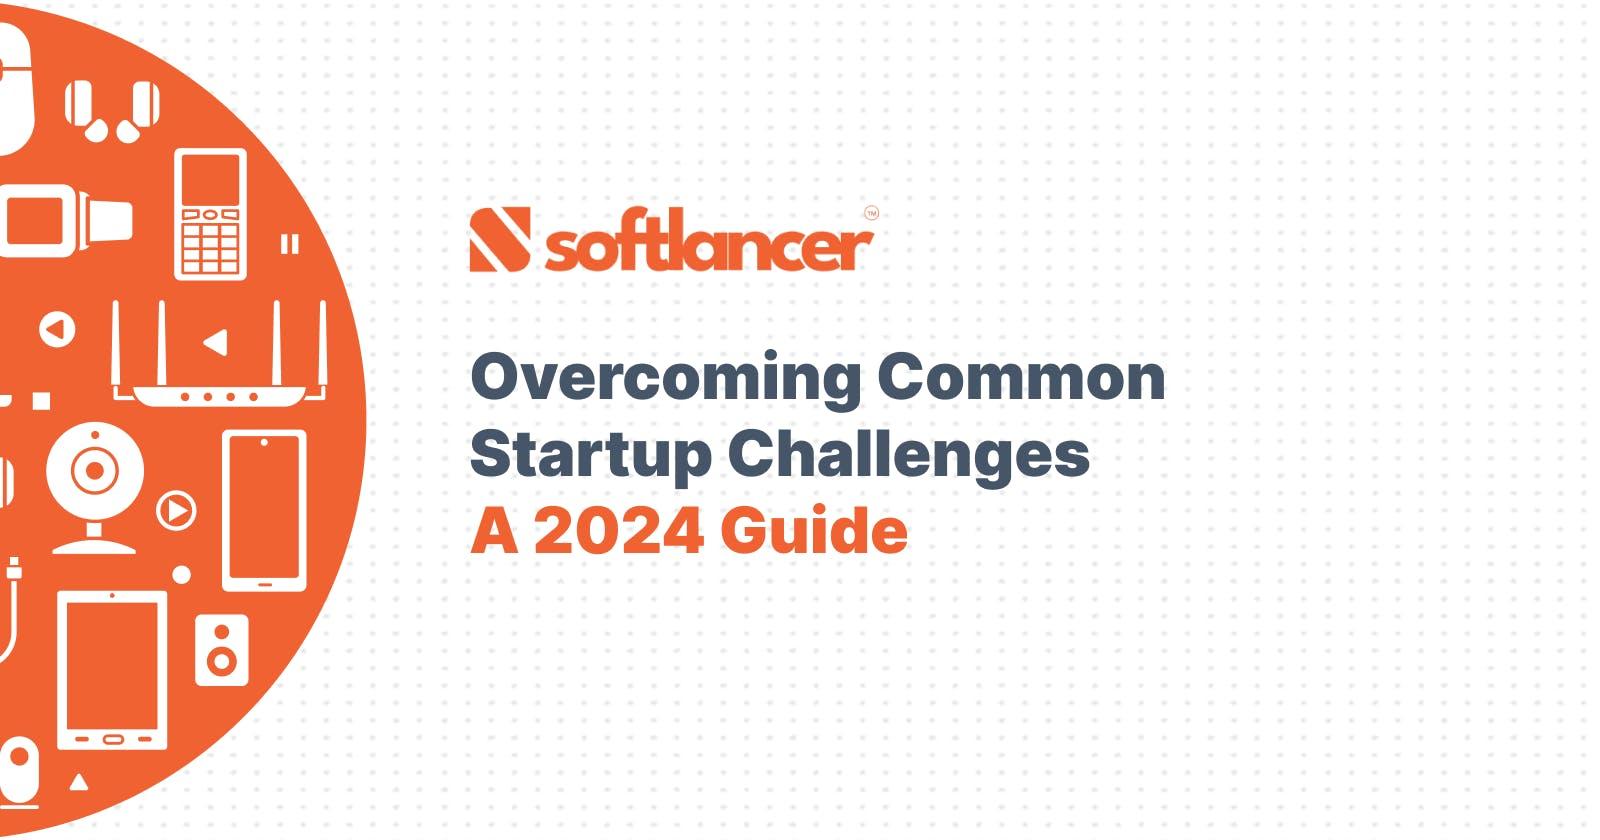 Overcoming Common Startup Challenges: A 2024 Guide